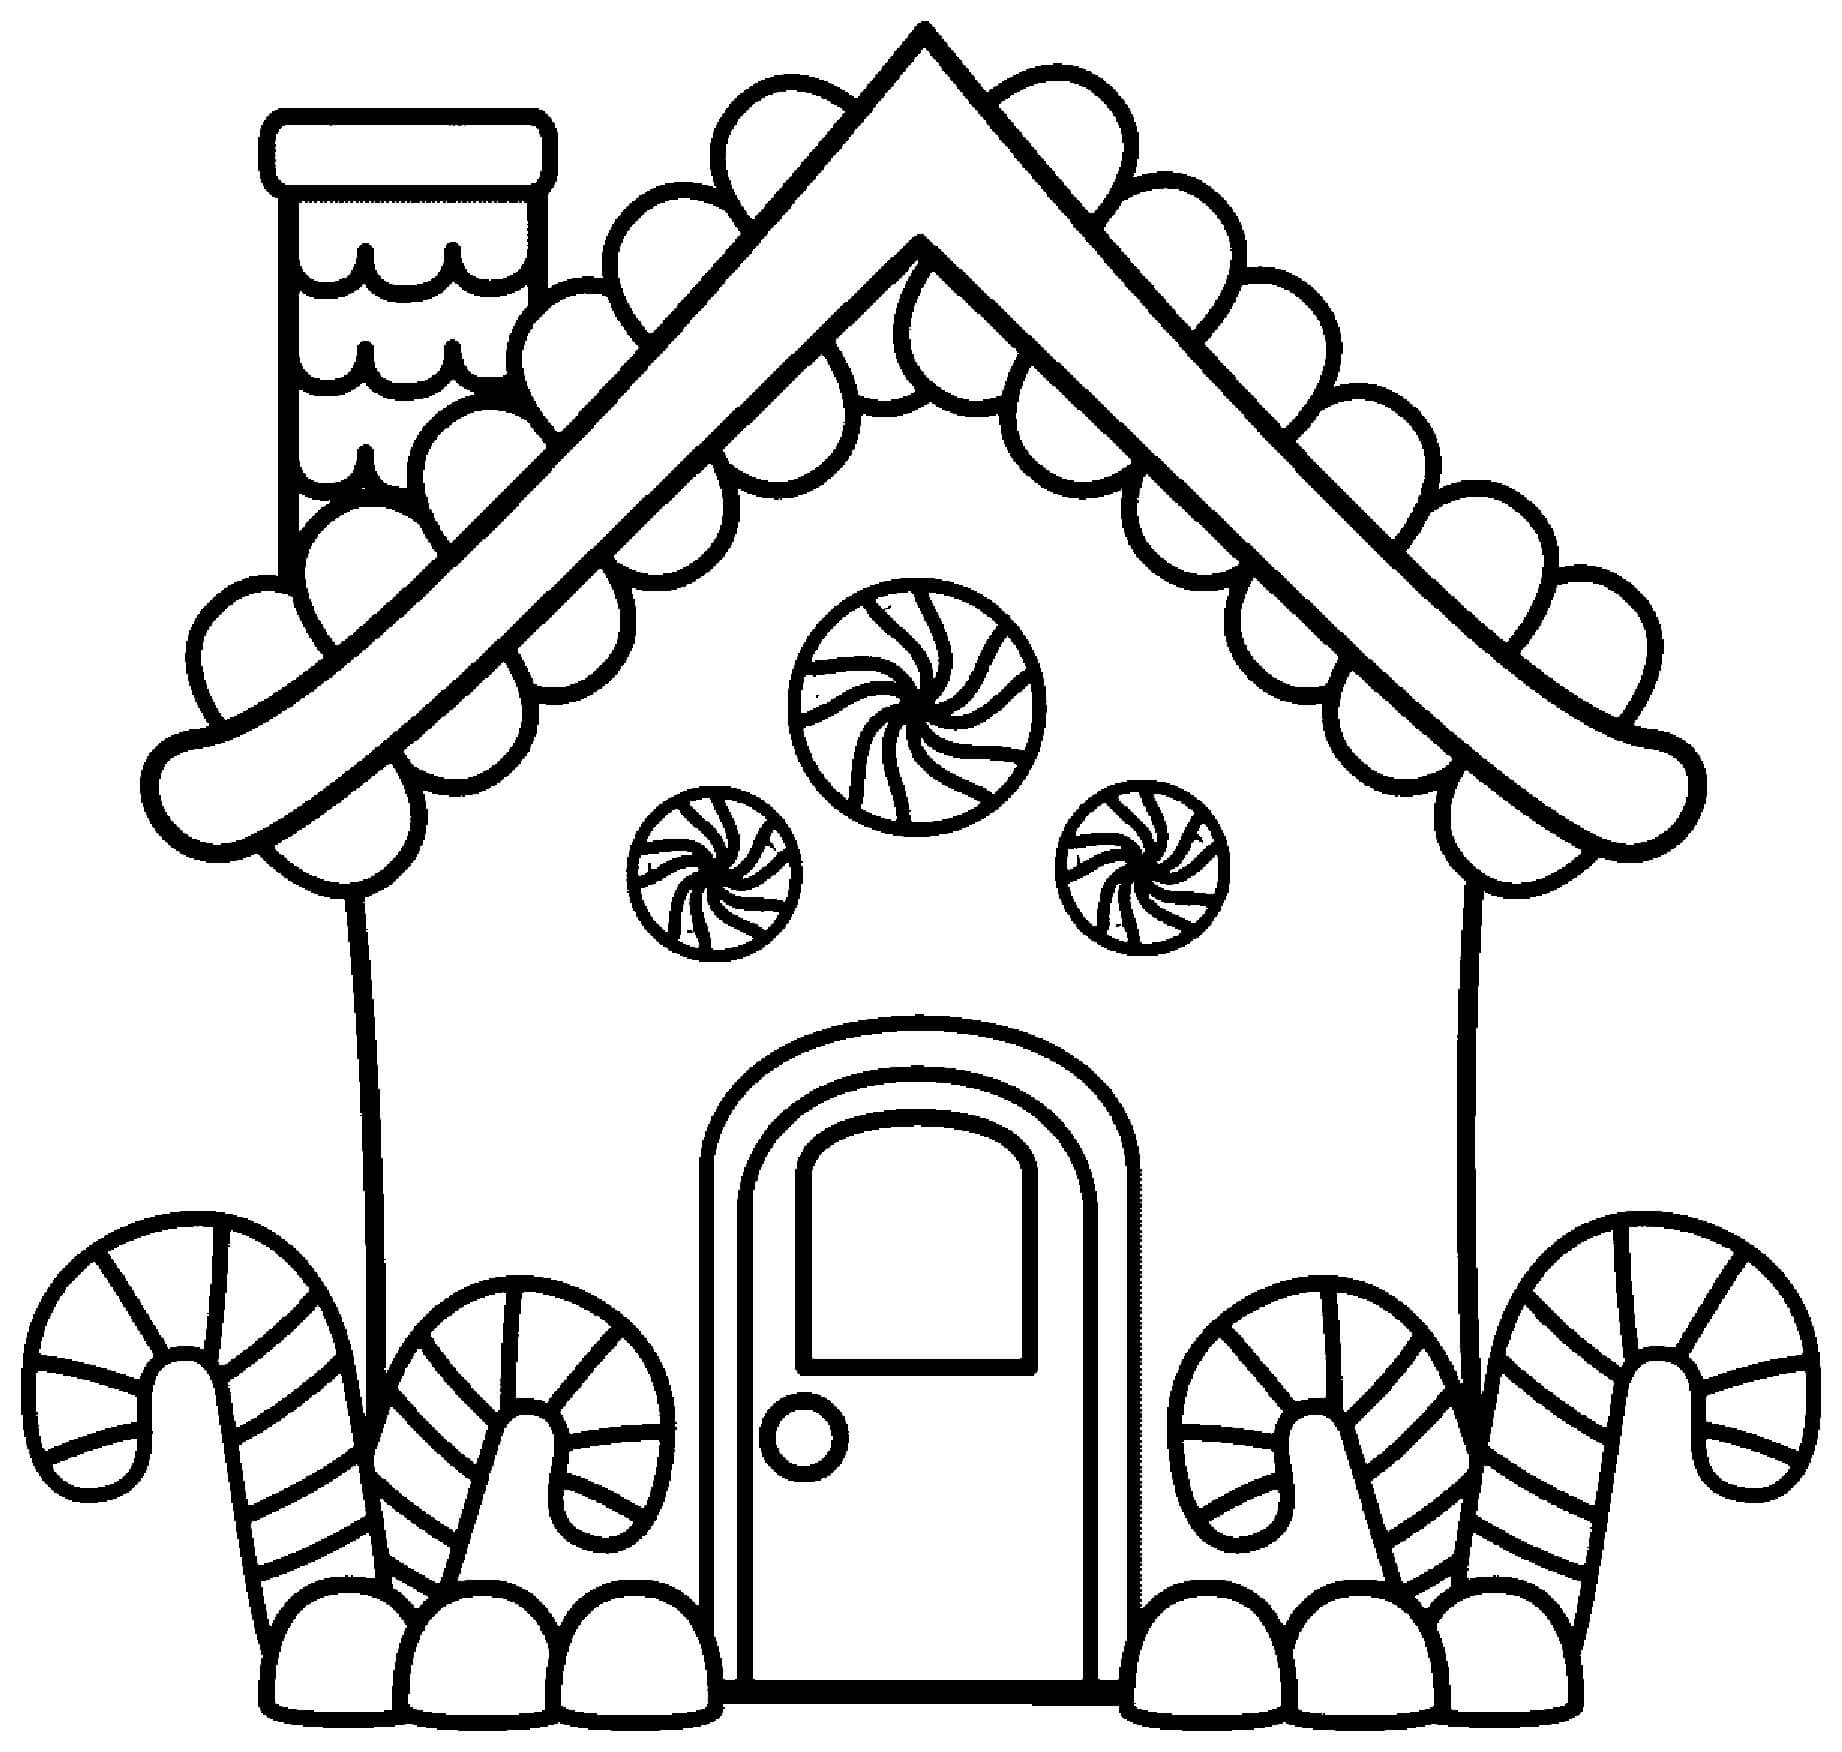 Gingerbread house drawing coloring page